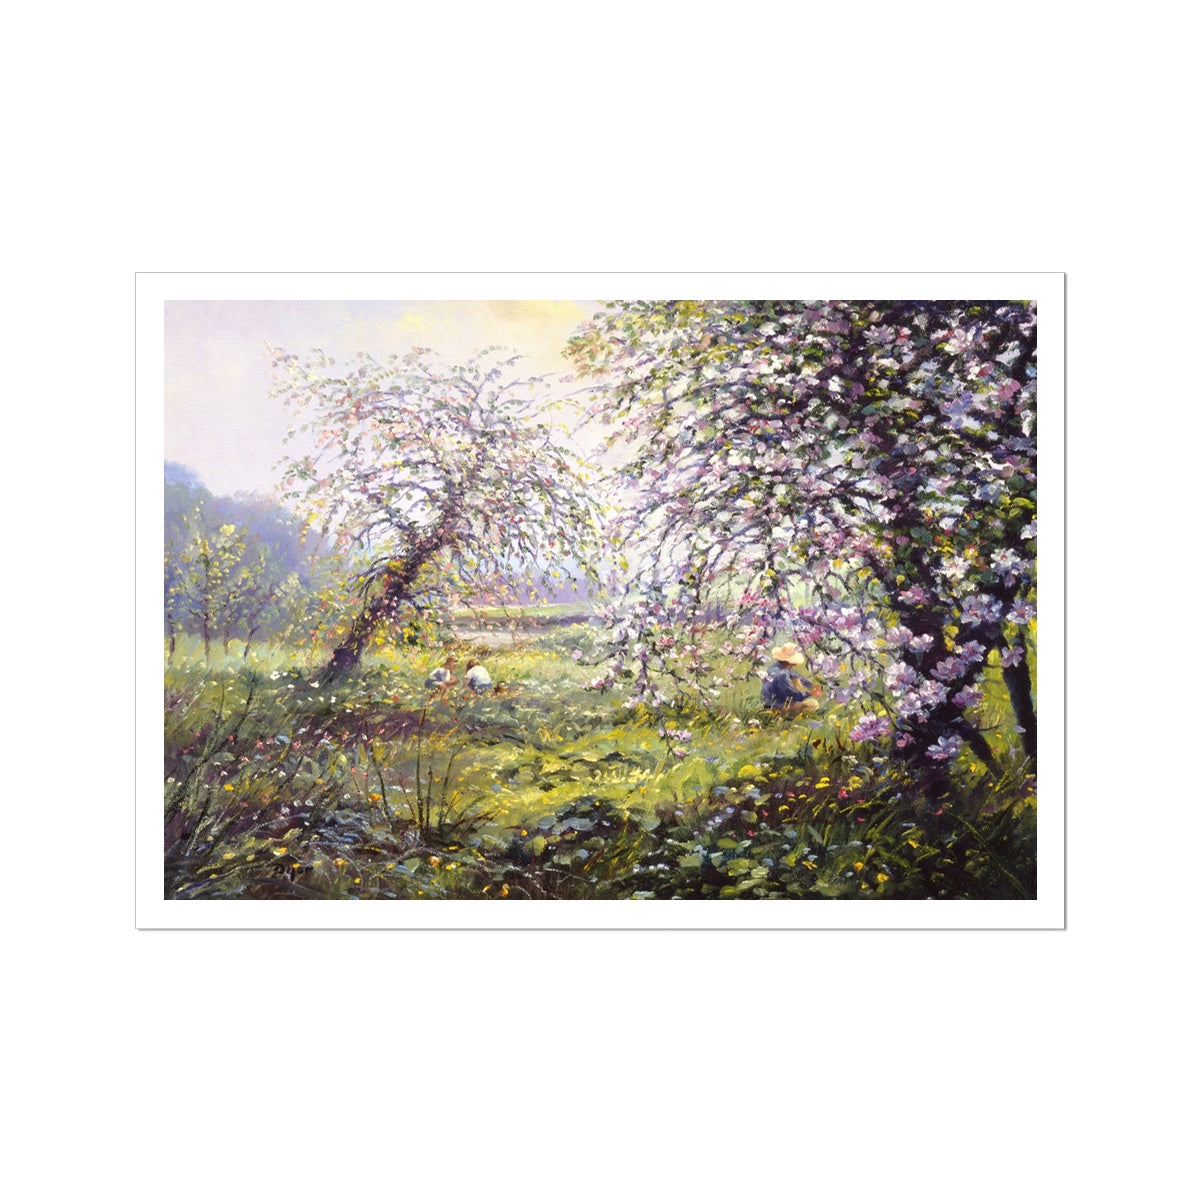 Ted Dyer Fine Art Print. Open Edition Cornish Art Print. 'Playing in the Apple Orchard'. Cornwall Art Gallery